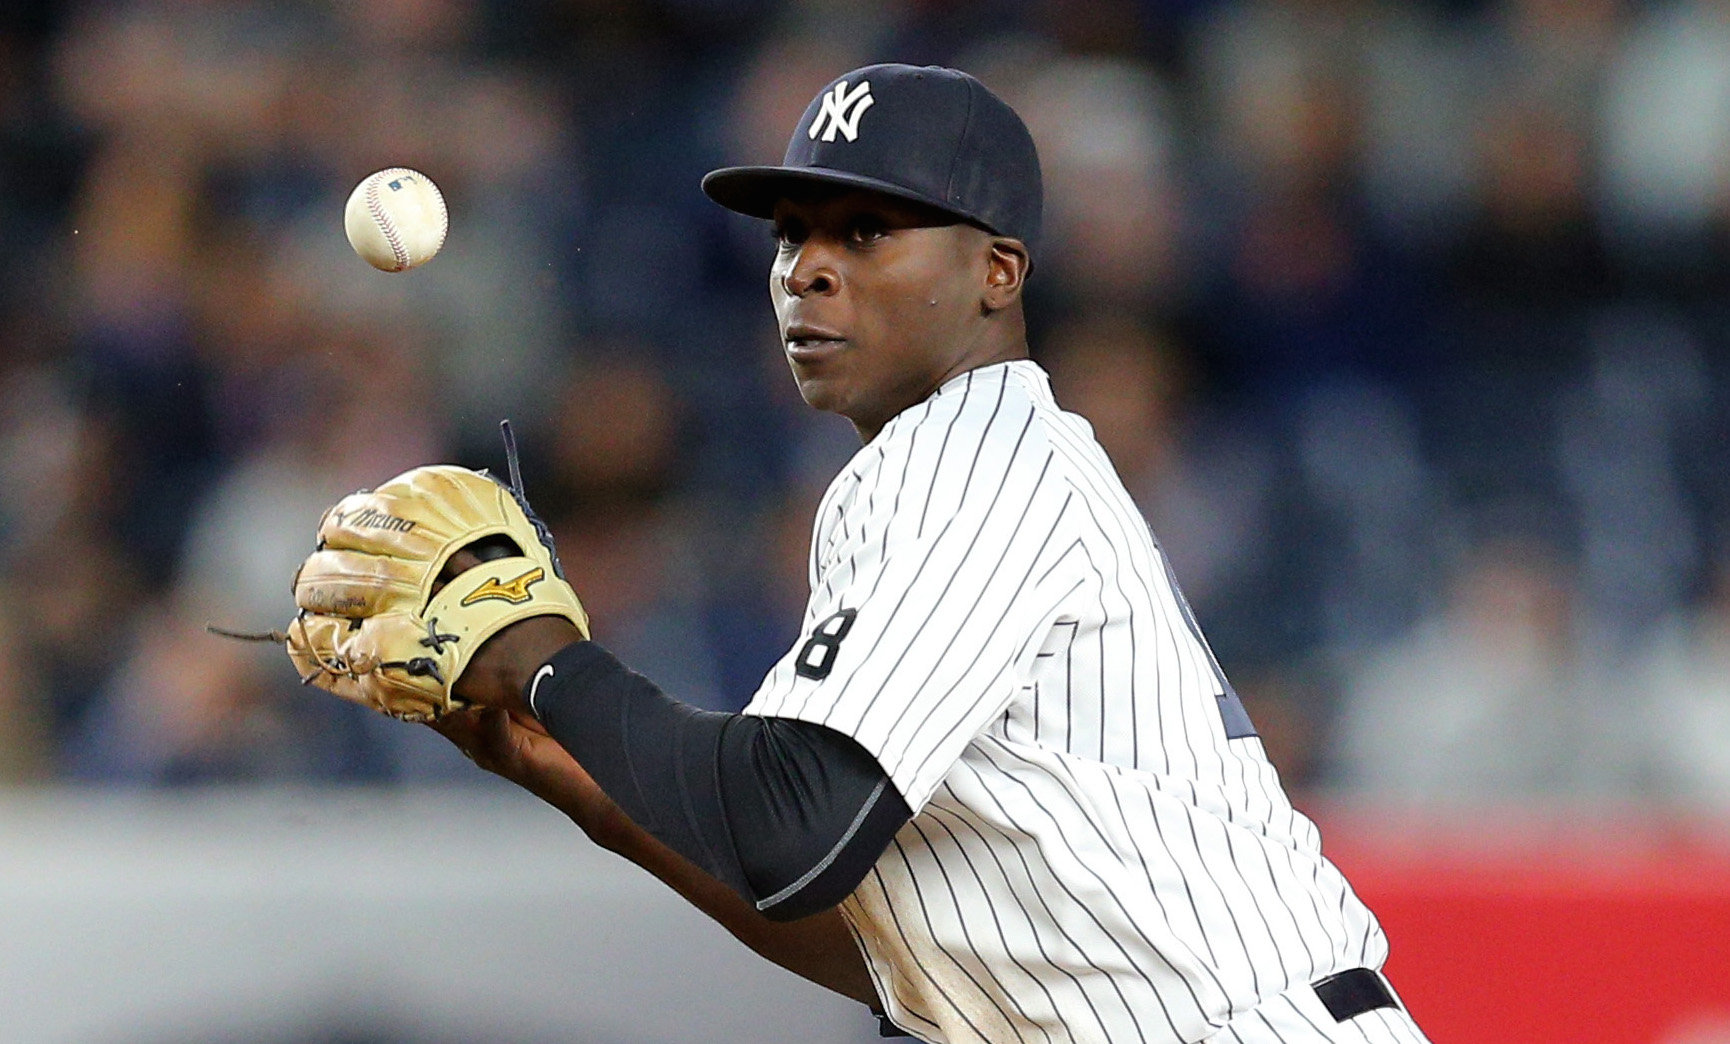 Could the Yankees bring back Didi Gregorius in 2021? - Pinstripe Alley